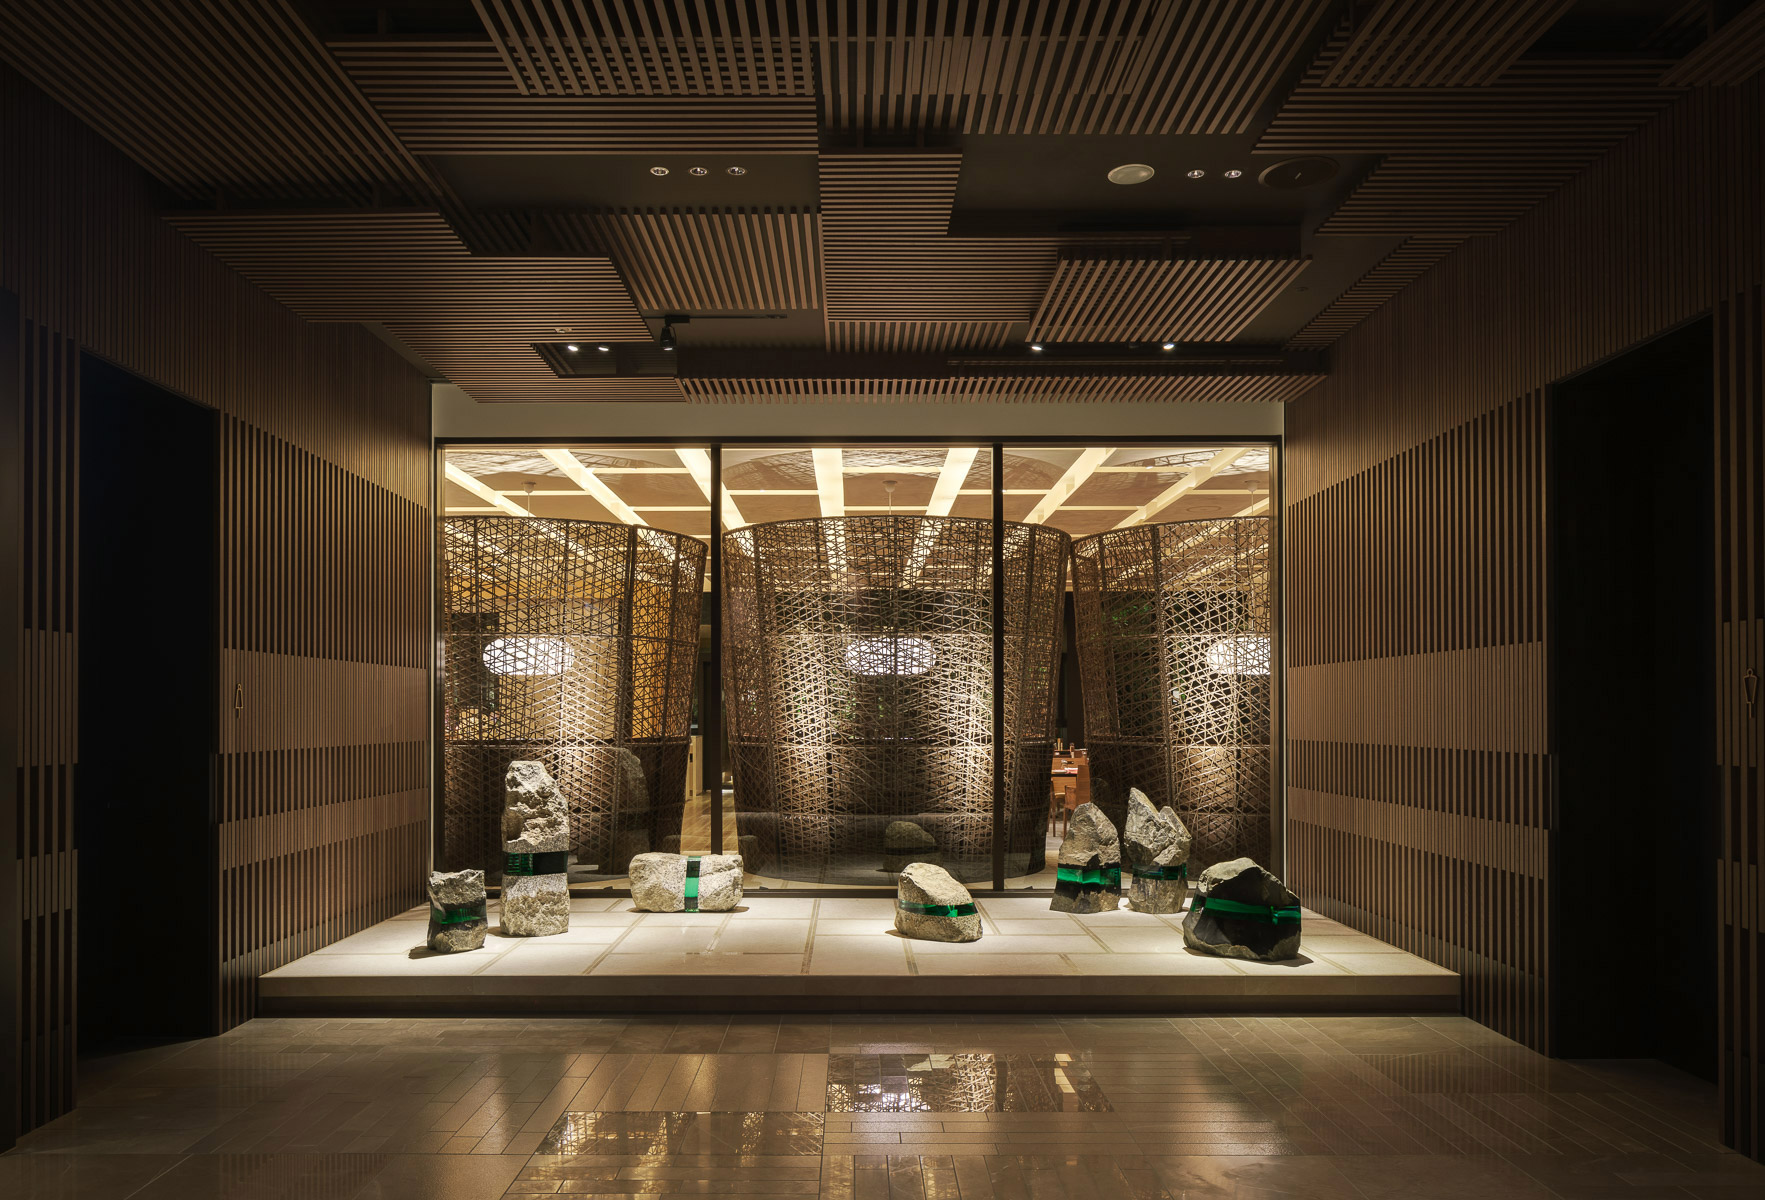 Photography brasserie in four seasons hotel kyoto blogs for Design hotel kyoto